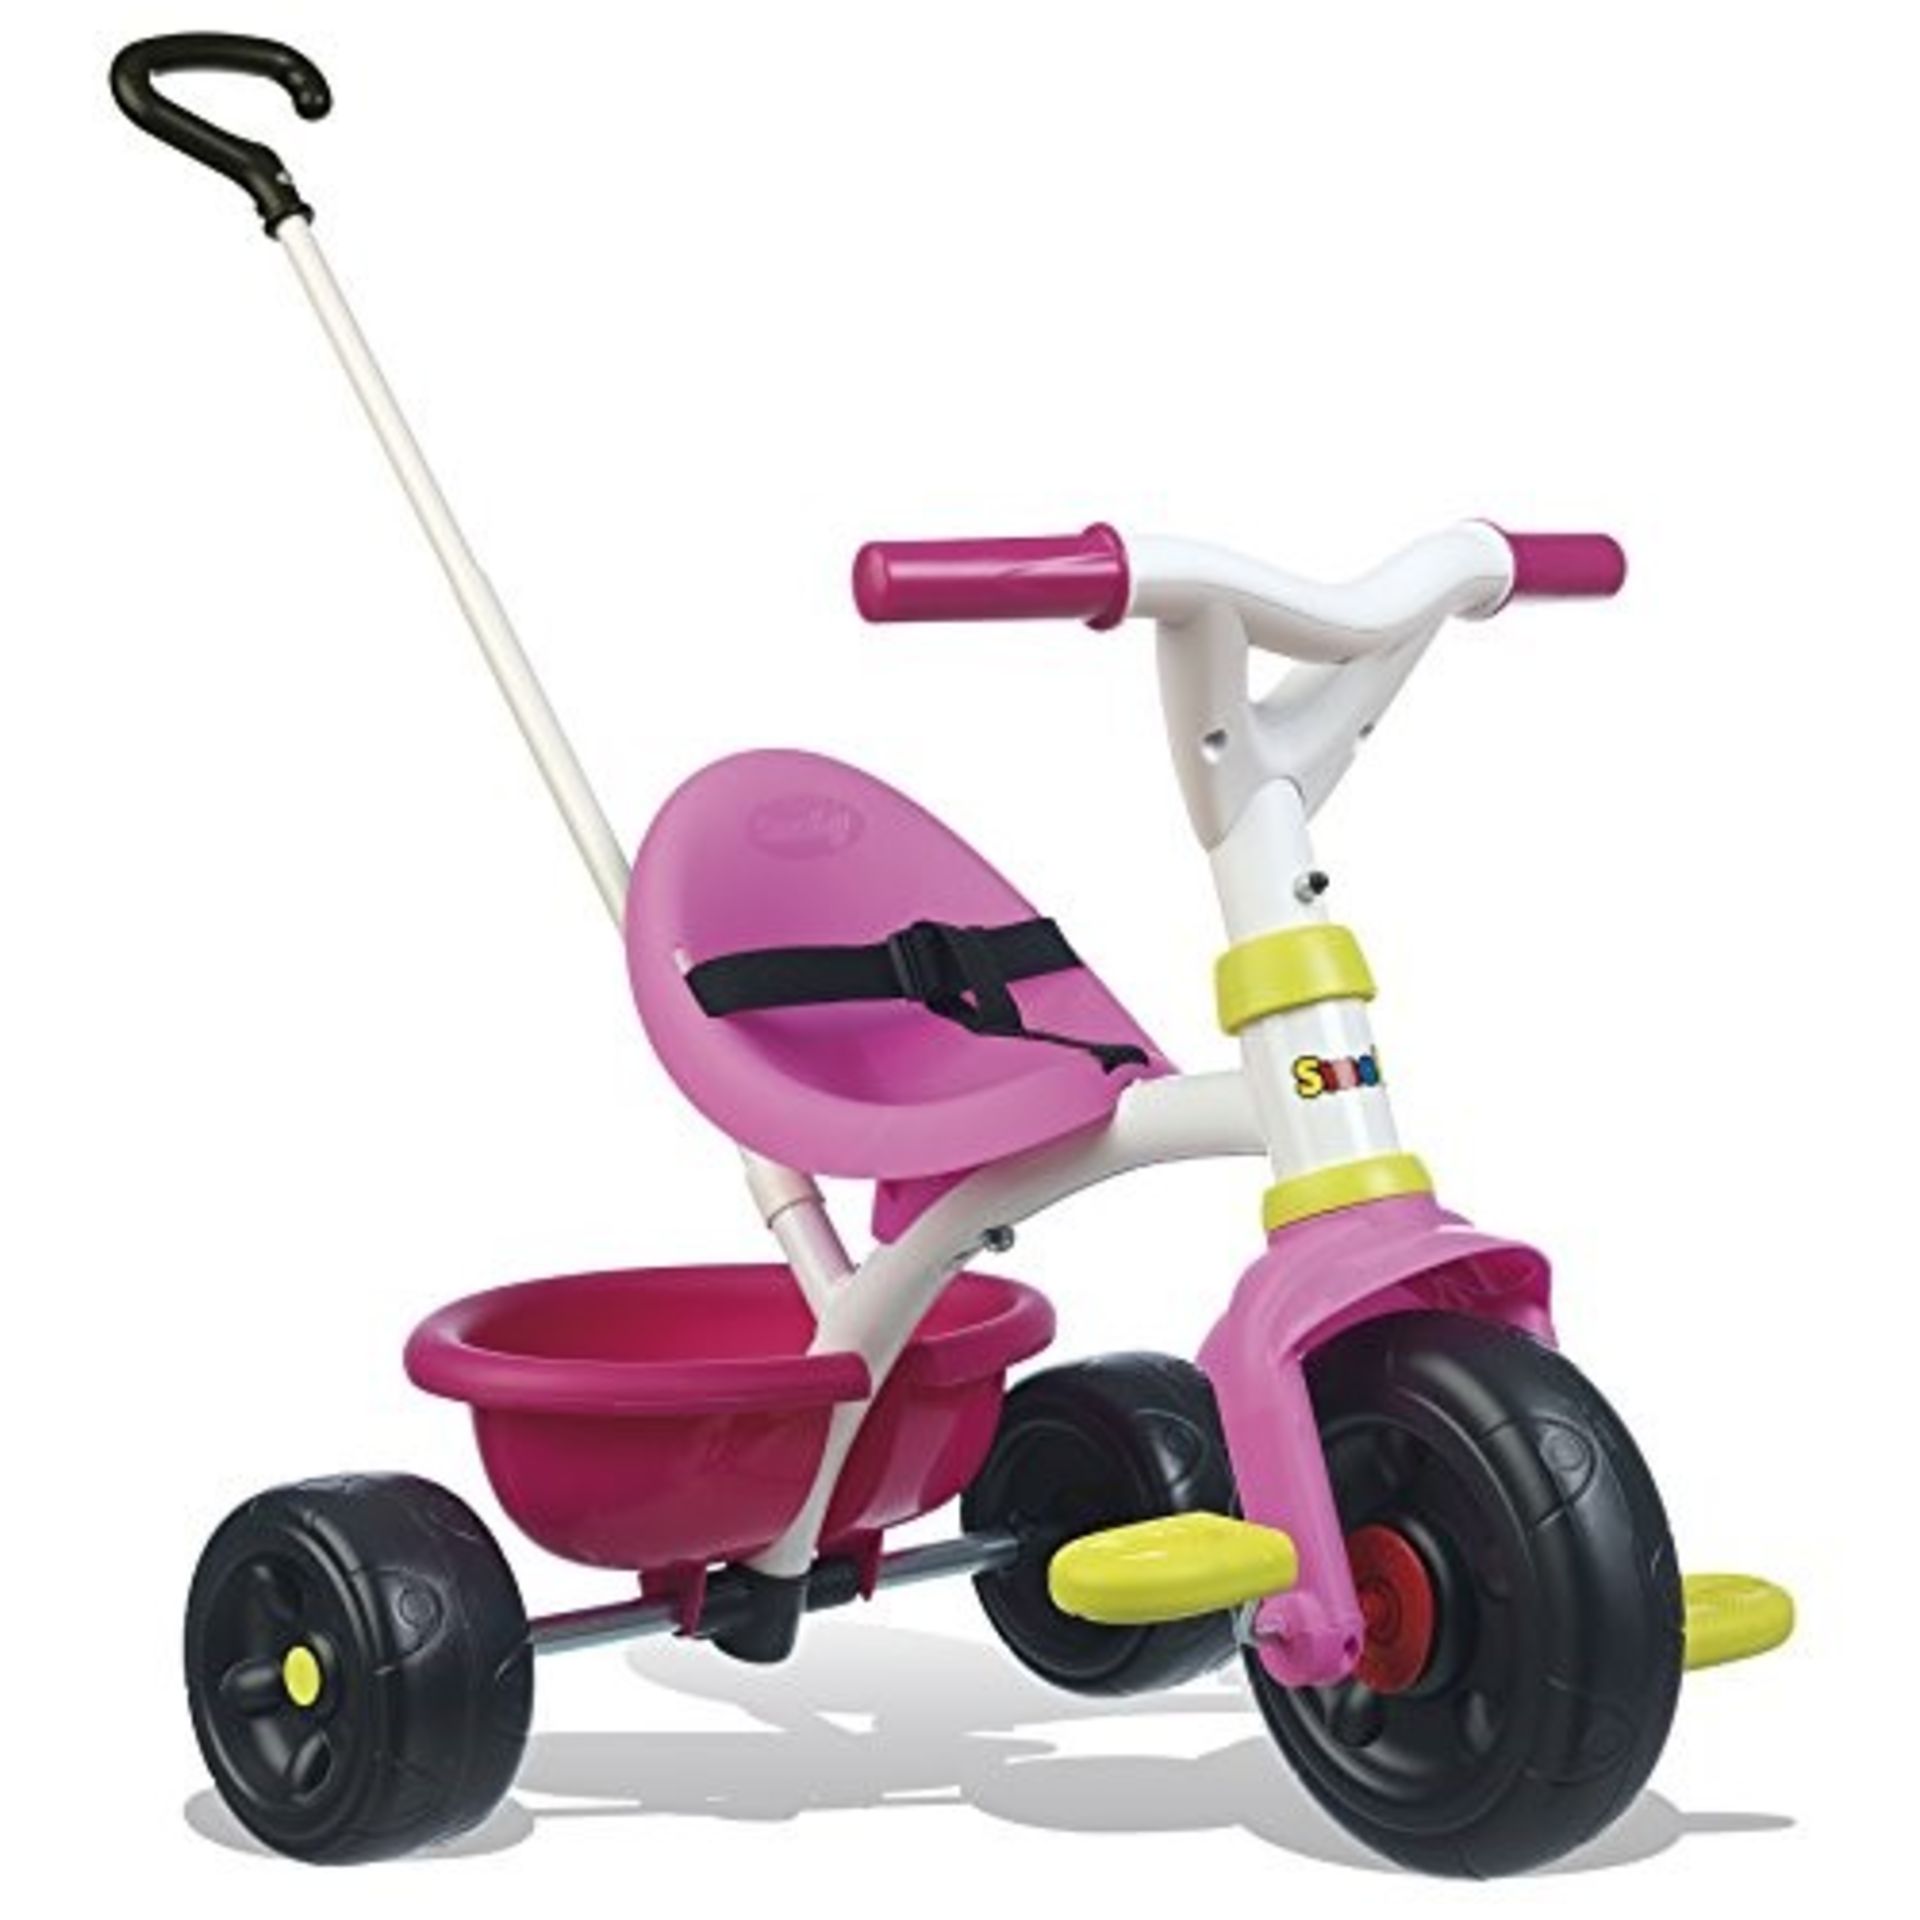 Smoby Push Along Trike with Parent Handle | Removable handle converts it to tricycle |